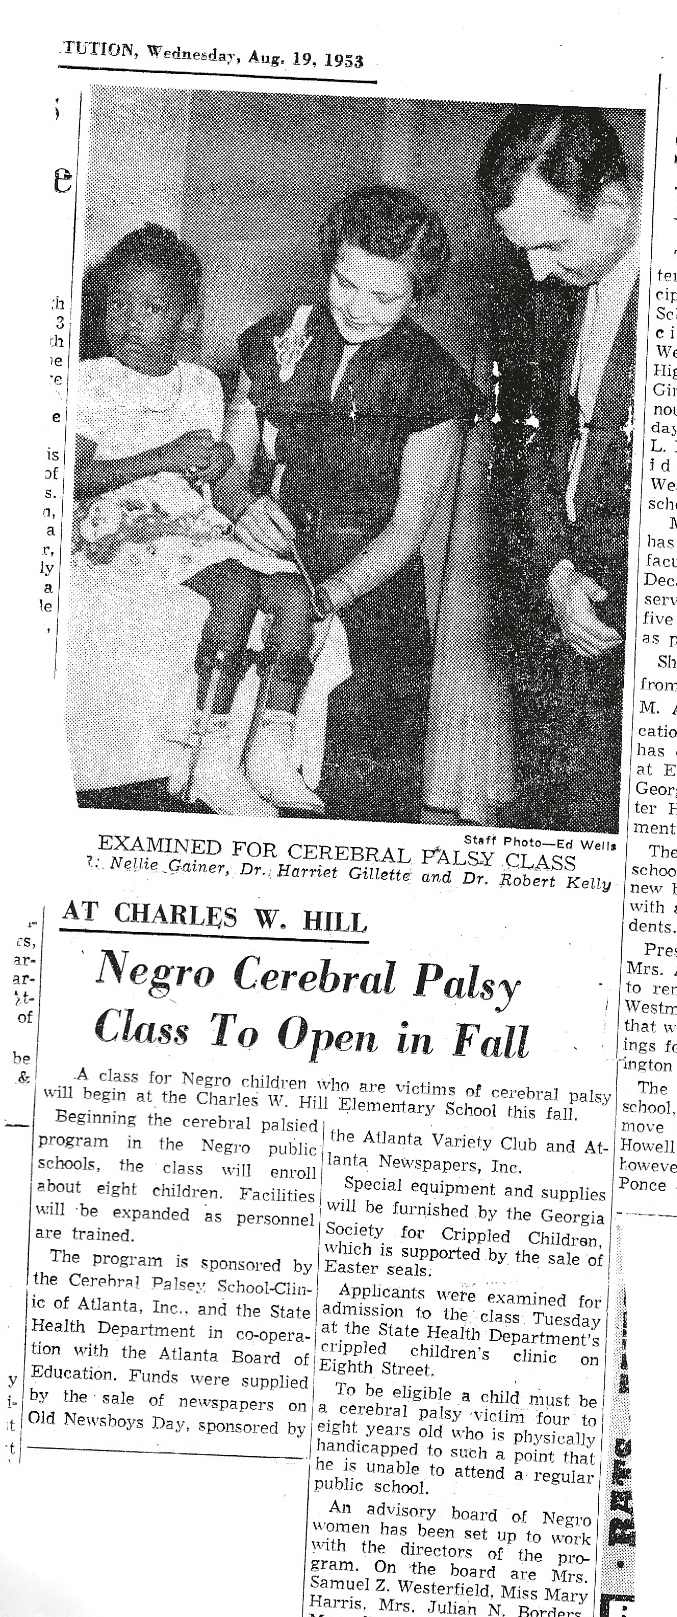 News clipping from Wednesday, August 19, 1953. Photo of a young Kate Gainer wearing a white dress next to two doctors, one with a medical knee reflex hammer mallet, captioned “EXAMINED FOR CEREBRAL PALSY CLASS, Dr. Nellie Gainer, Dr. Harriet Gillette and Dr. Robert Kelly”. Article title, “At Charles W. Hill Negro Cerebral Palsy Class To Open in Fall,” A class for Negro children who are victims of cerebral palsy will begin at thee Charles W. Hill Elementary School this fall. Beginning the cerebral palsied program in the Negro public school, the class will enroll about eight children. Facilities will be expanded as personnel are trained. The program is sponsored by the Cerebral Palsey School Clinic of Atlanta, Inc., are the State Health Department in co-operation with the Atlantic Board of Education. Funds were supplied by the sale of newspapers on Old Newsboy Day, sponsored by the Atlanta Variety Club and Atlanta Newspapers, Inc.. Special equipment and supplies will be furnished by the Georgia Society for Crippled Children, which is supported by the sale of Easter seals. Applicants were examined for admission to the class Tuesday at the State Health Department’s crippled children’s clinic on Eighth Street. To be eligible a child must be a cerebral palsy victim four to eight years old who is physically handicapped to such a point that he is unable to attend a regular public school. An advisory board of Negro women has been set up to work with the directors of the program. On the board are Mrs. Samuel Z. Westerfield, Miss Mary Harris, Mrs. Julian…